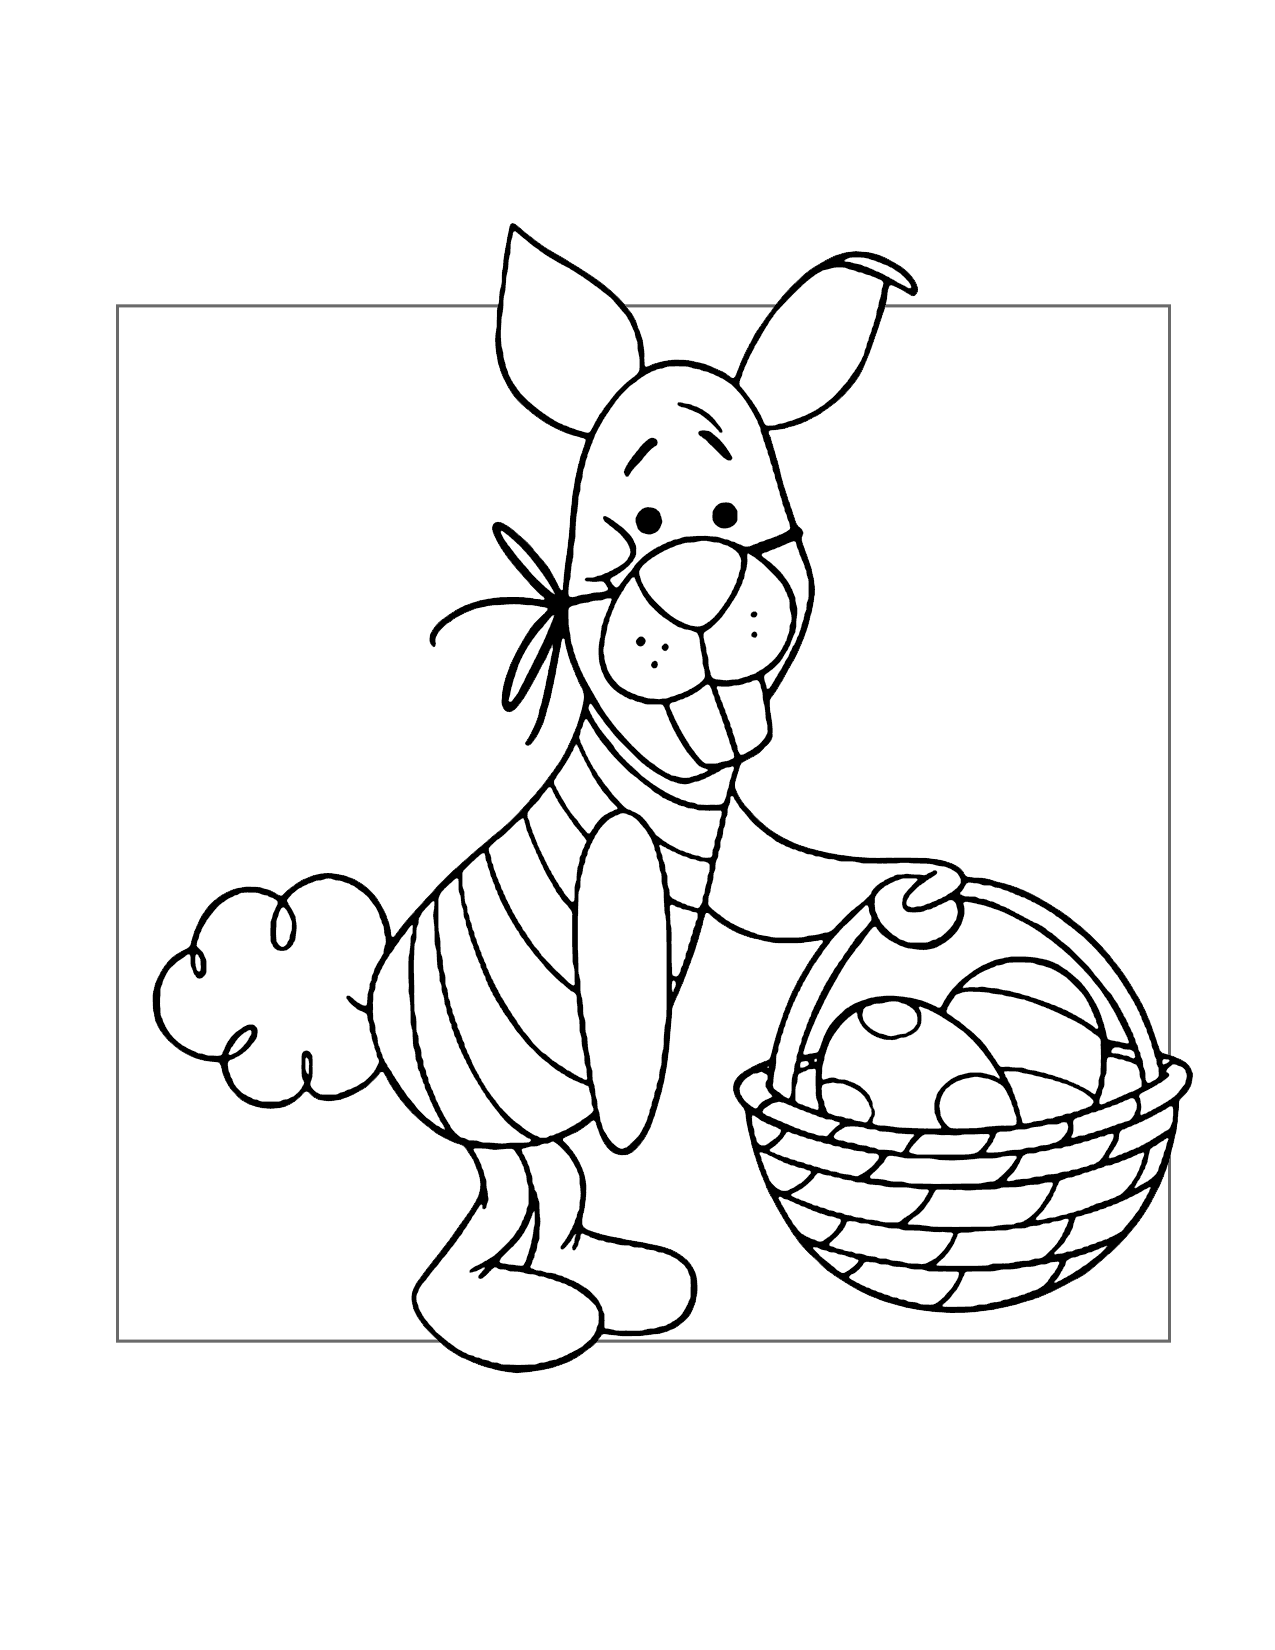 The Easter Piglet Coloring Page